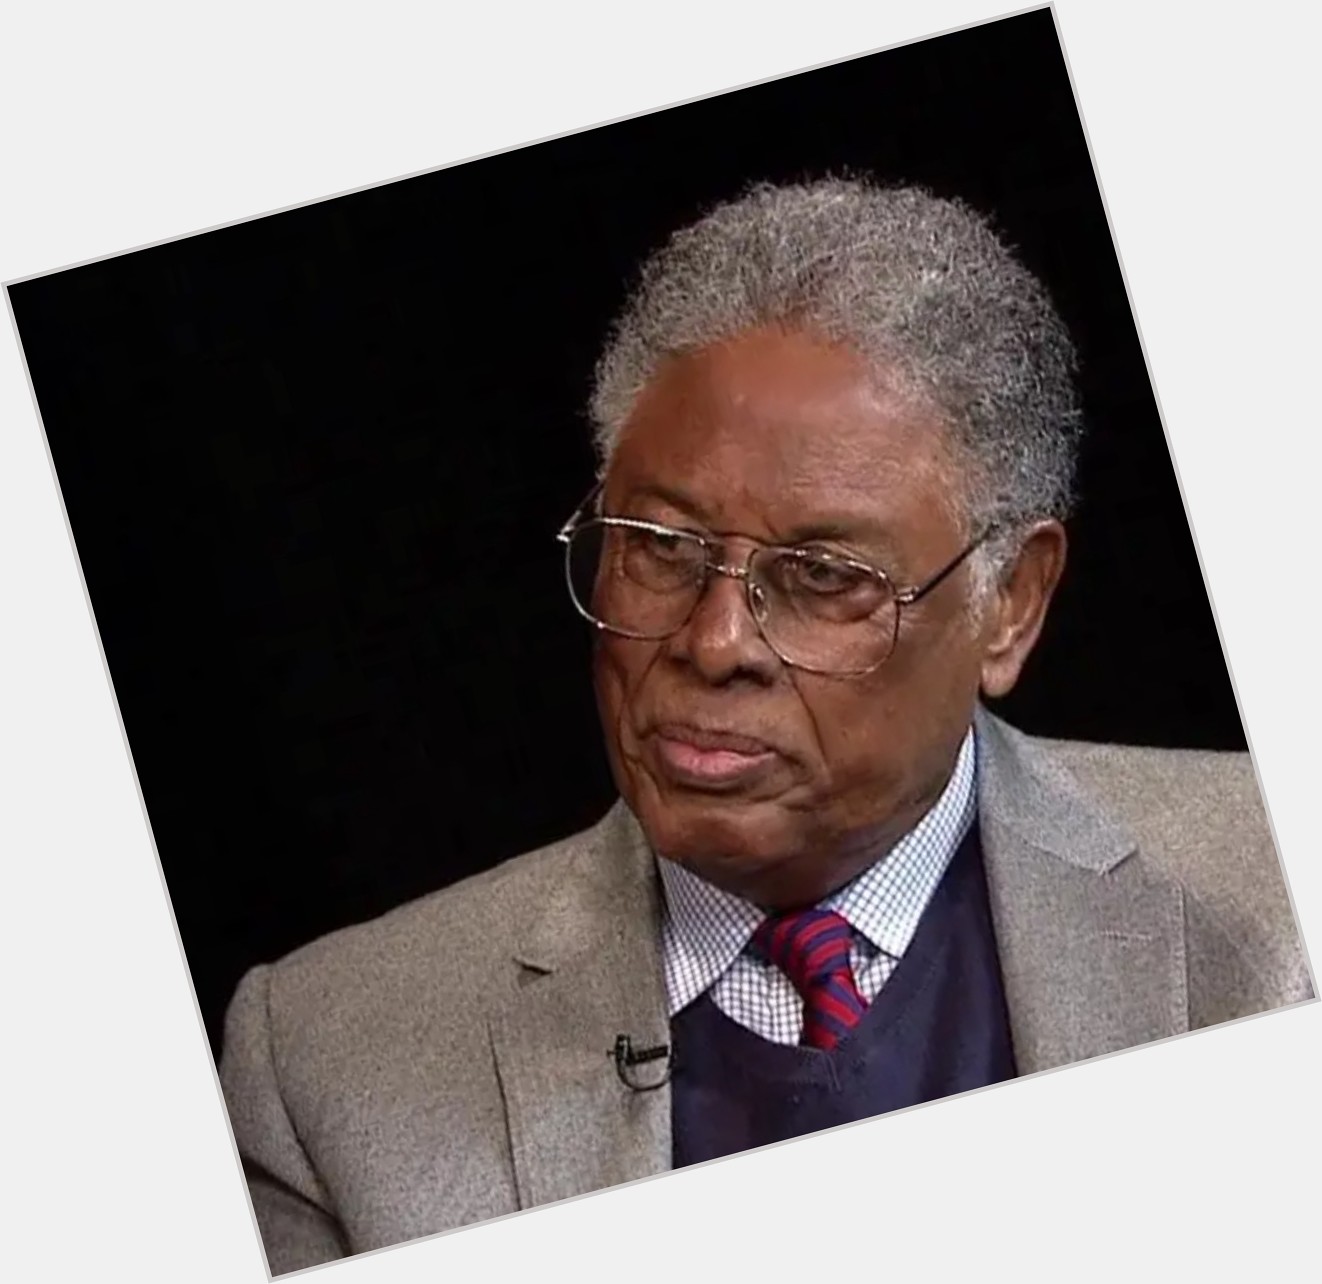 Happy 91st birthday Thomas Sowell. Have a great day and thank you for so much inspiration. 